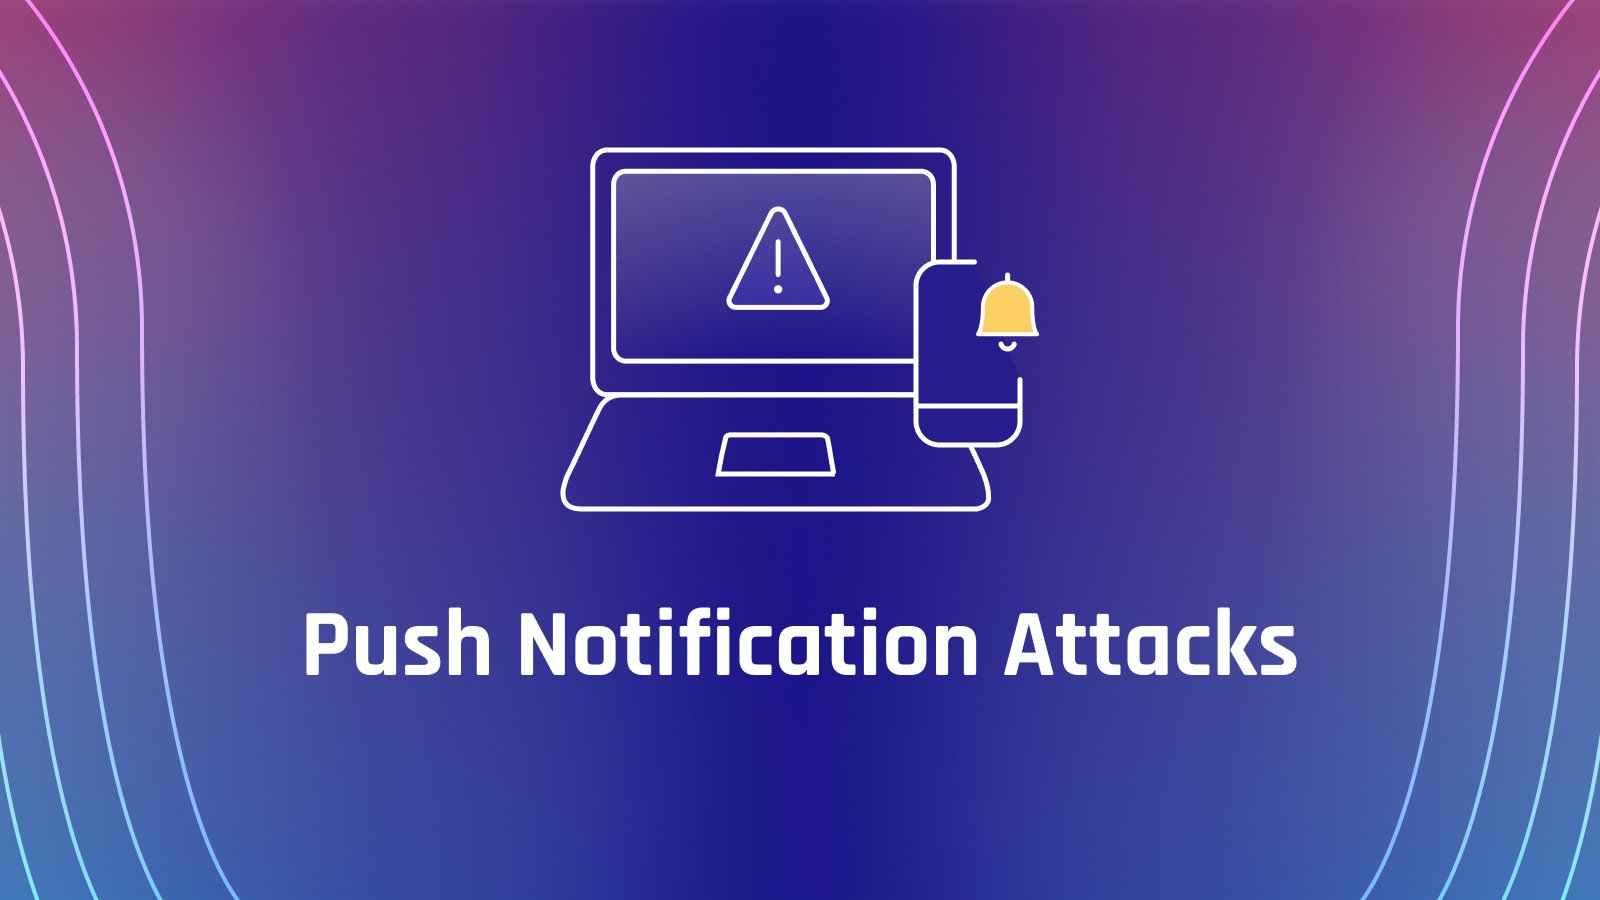 What Are Push Attacks?